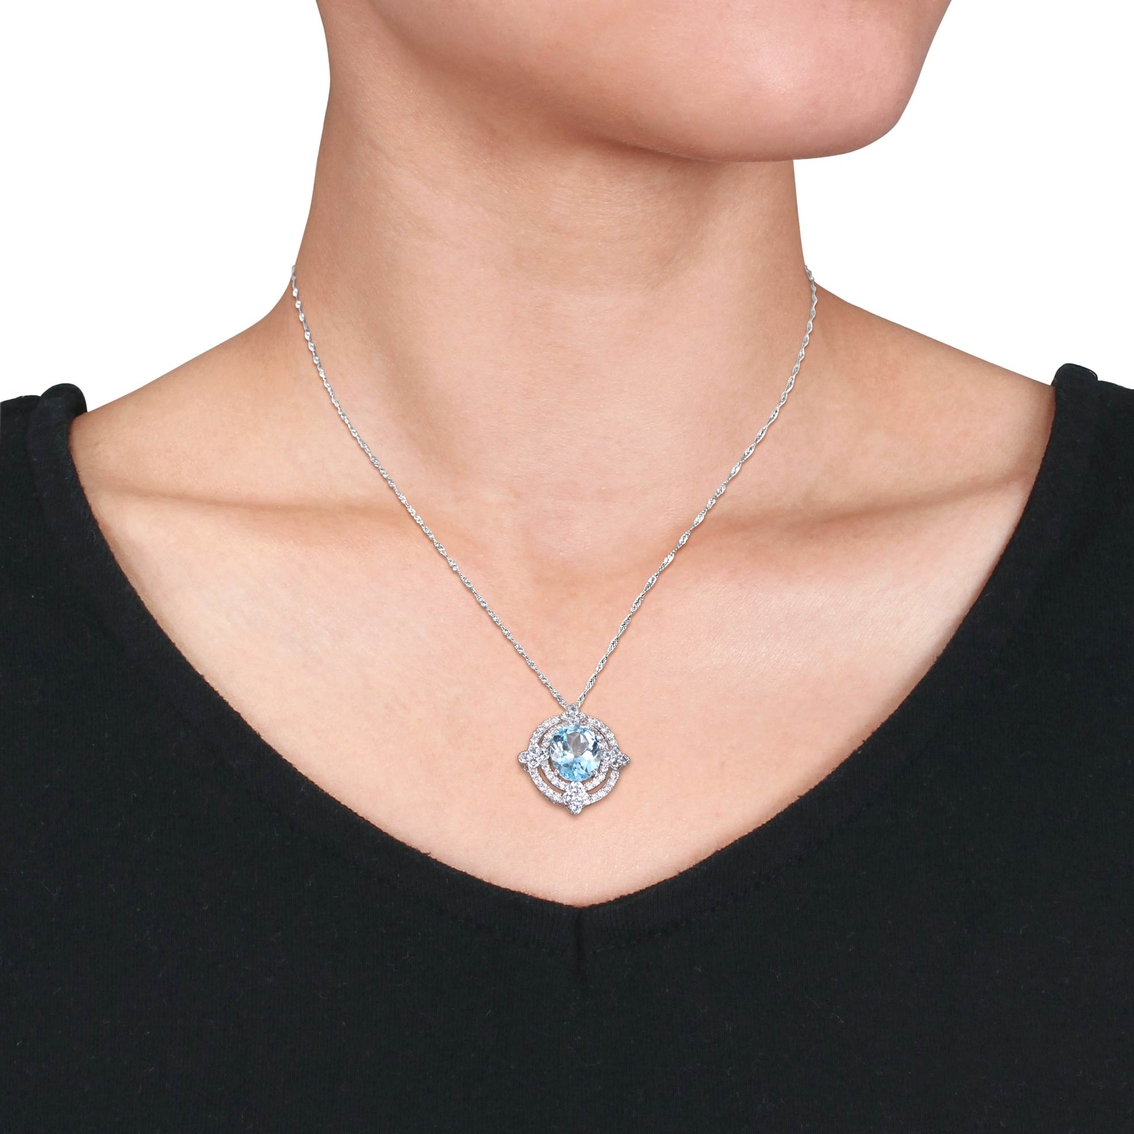 Sofia B. Blue Topaz and 1/2 CTW Diamond Halo Necklace in 14K White Gold - Image 2 of 2